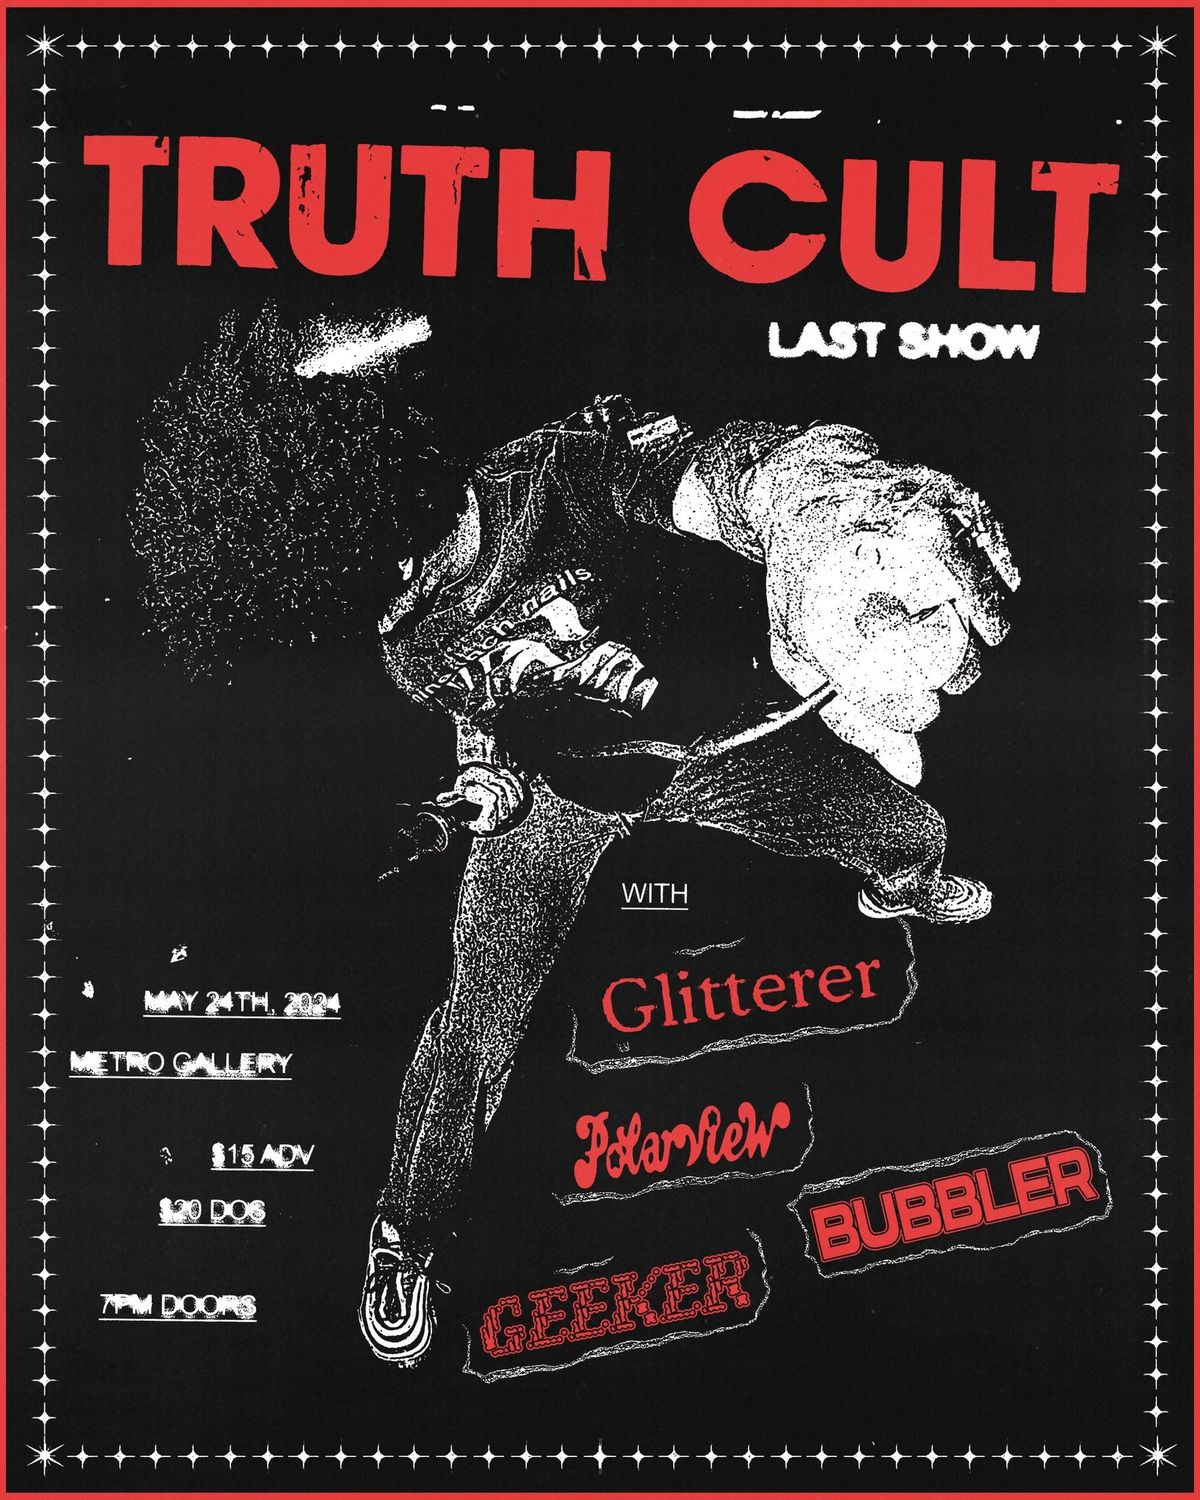 TRUTH CULT LAST SHOW w\/ Polarview, Bubbler and Geeker @ Metro Baltimore 